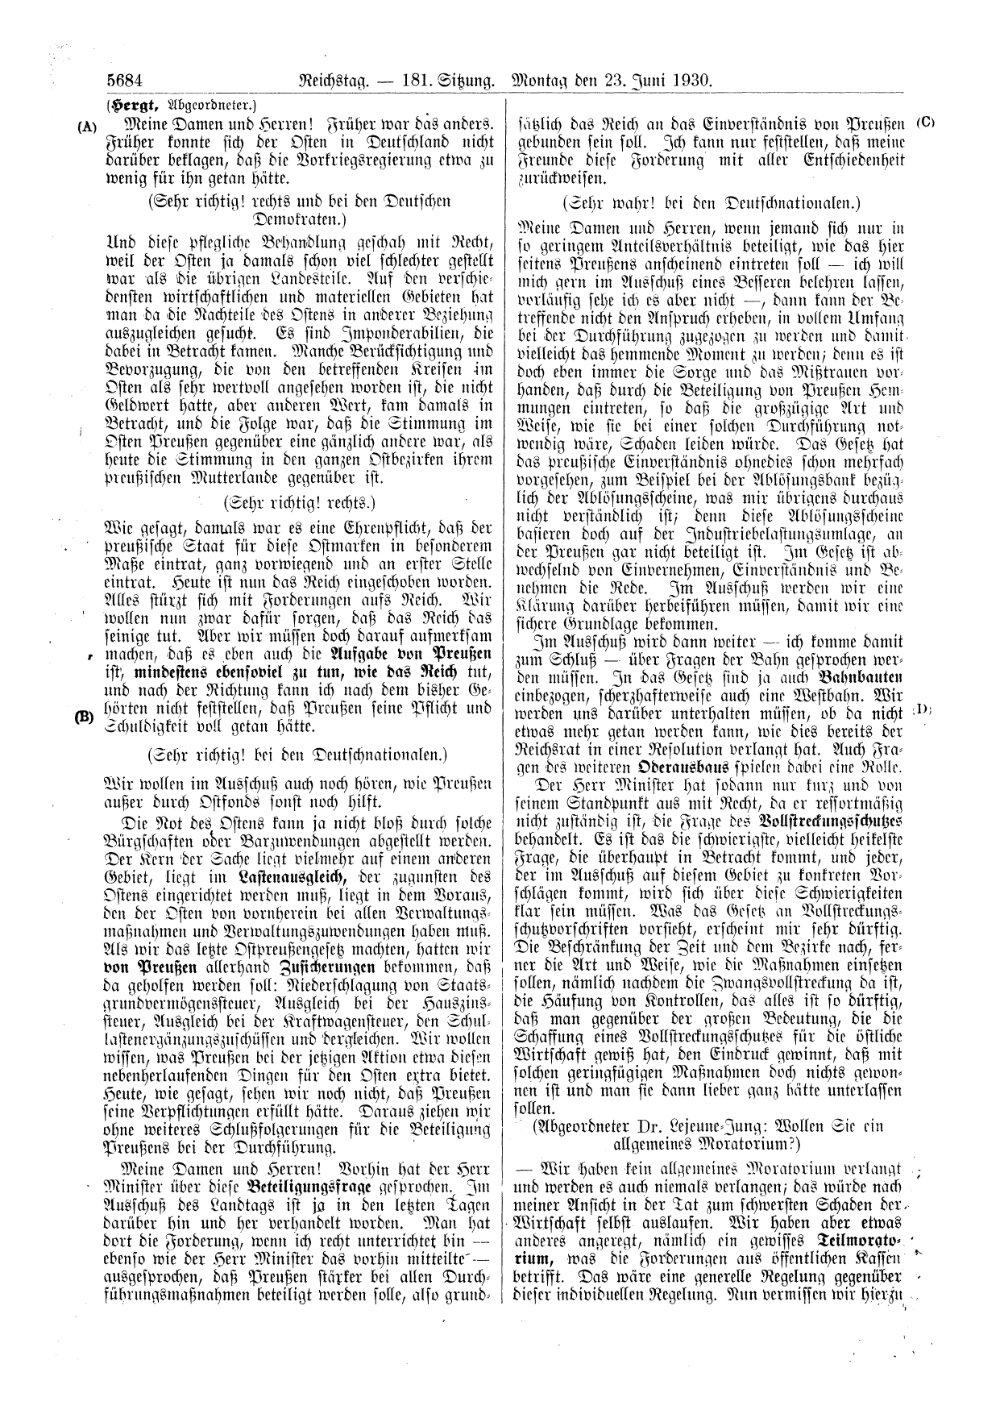 Scan of page 5684